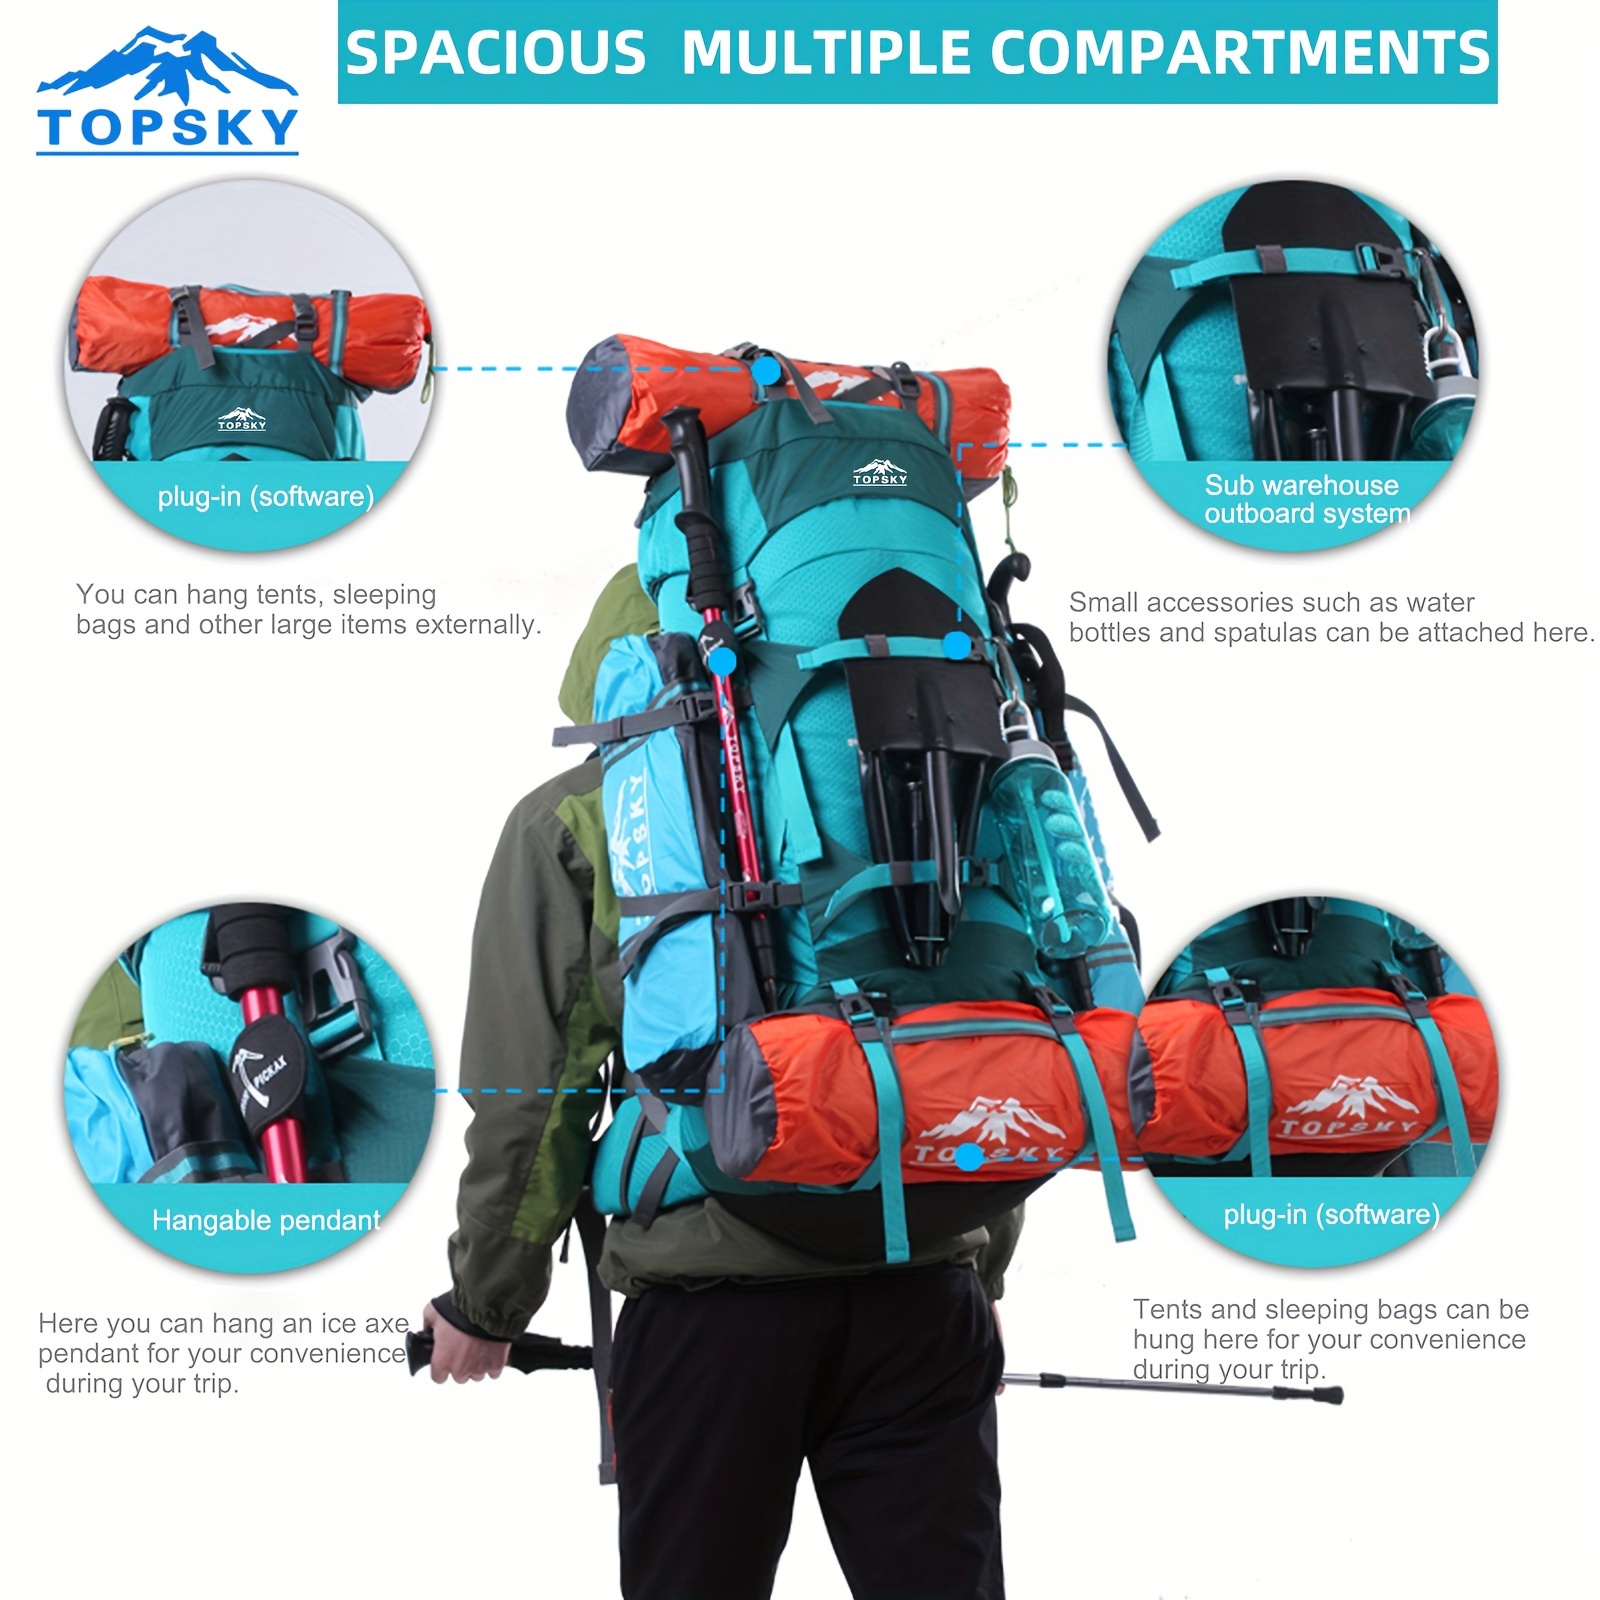 TOPSKY 18.49gal Mountaineering Backpack, Travel Camping Day Bag Waterproof  Lightweight Hiking Camping Backpack, Outdoor Adjustable Sports Backpack Wit